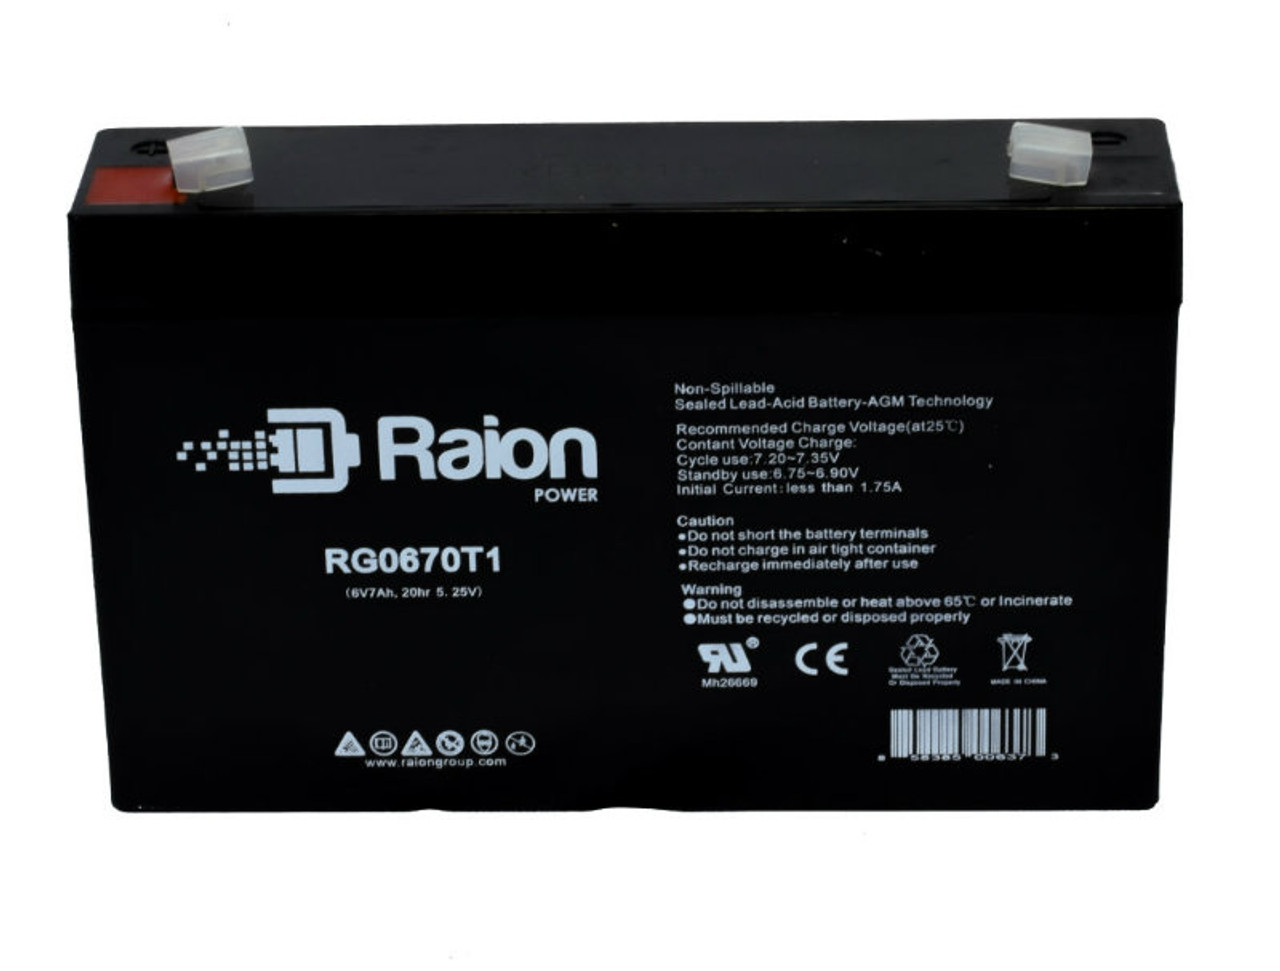 Raion Power RG0670T1 Replacement Battery Cartridge for Kid Motorz 1176 Mini Cabrio F57 Red